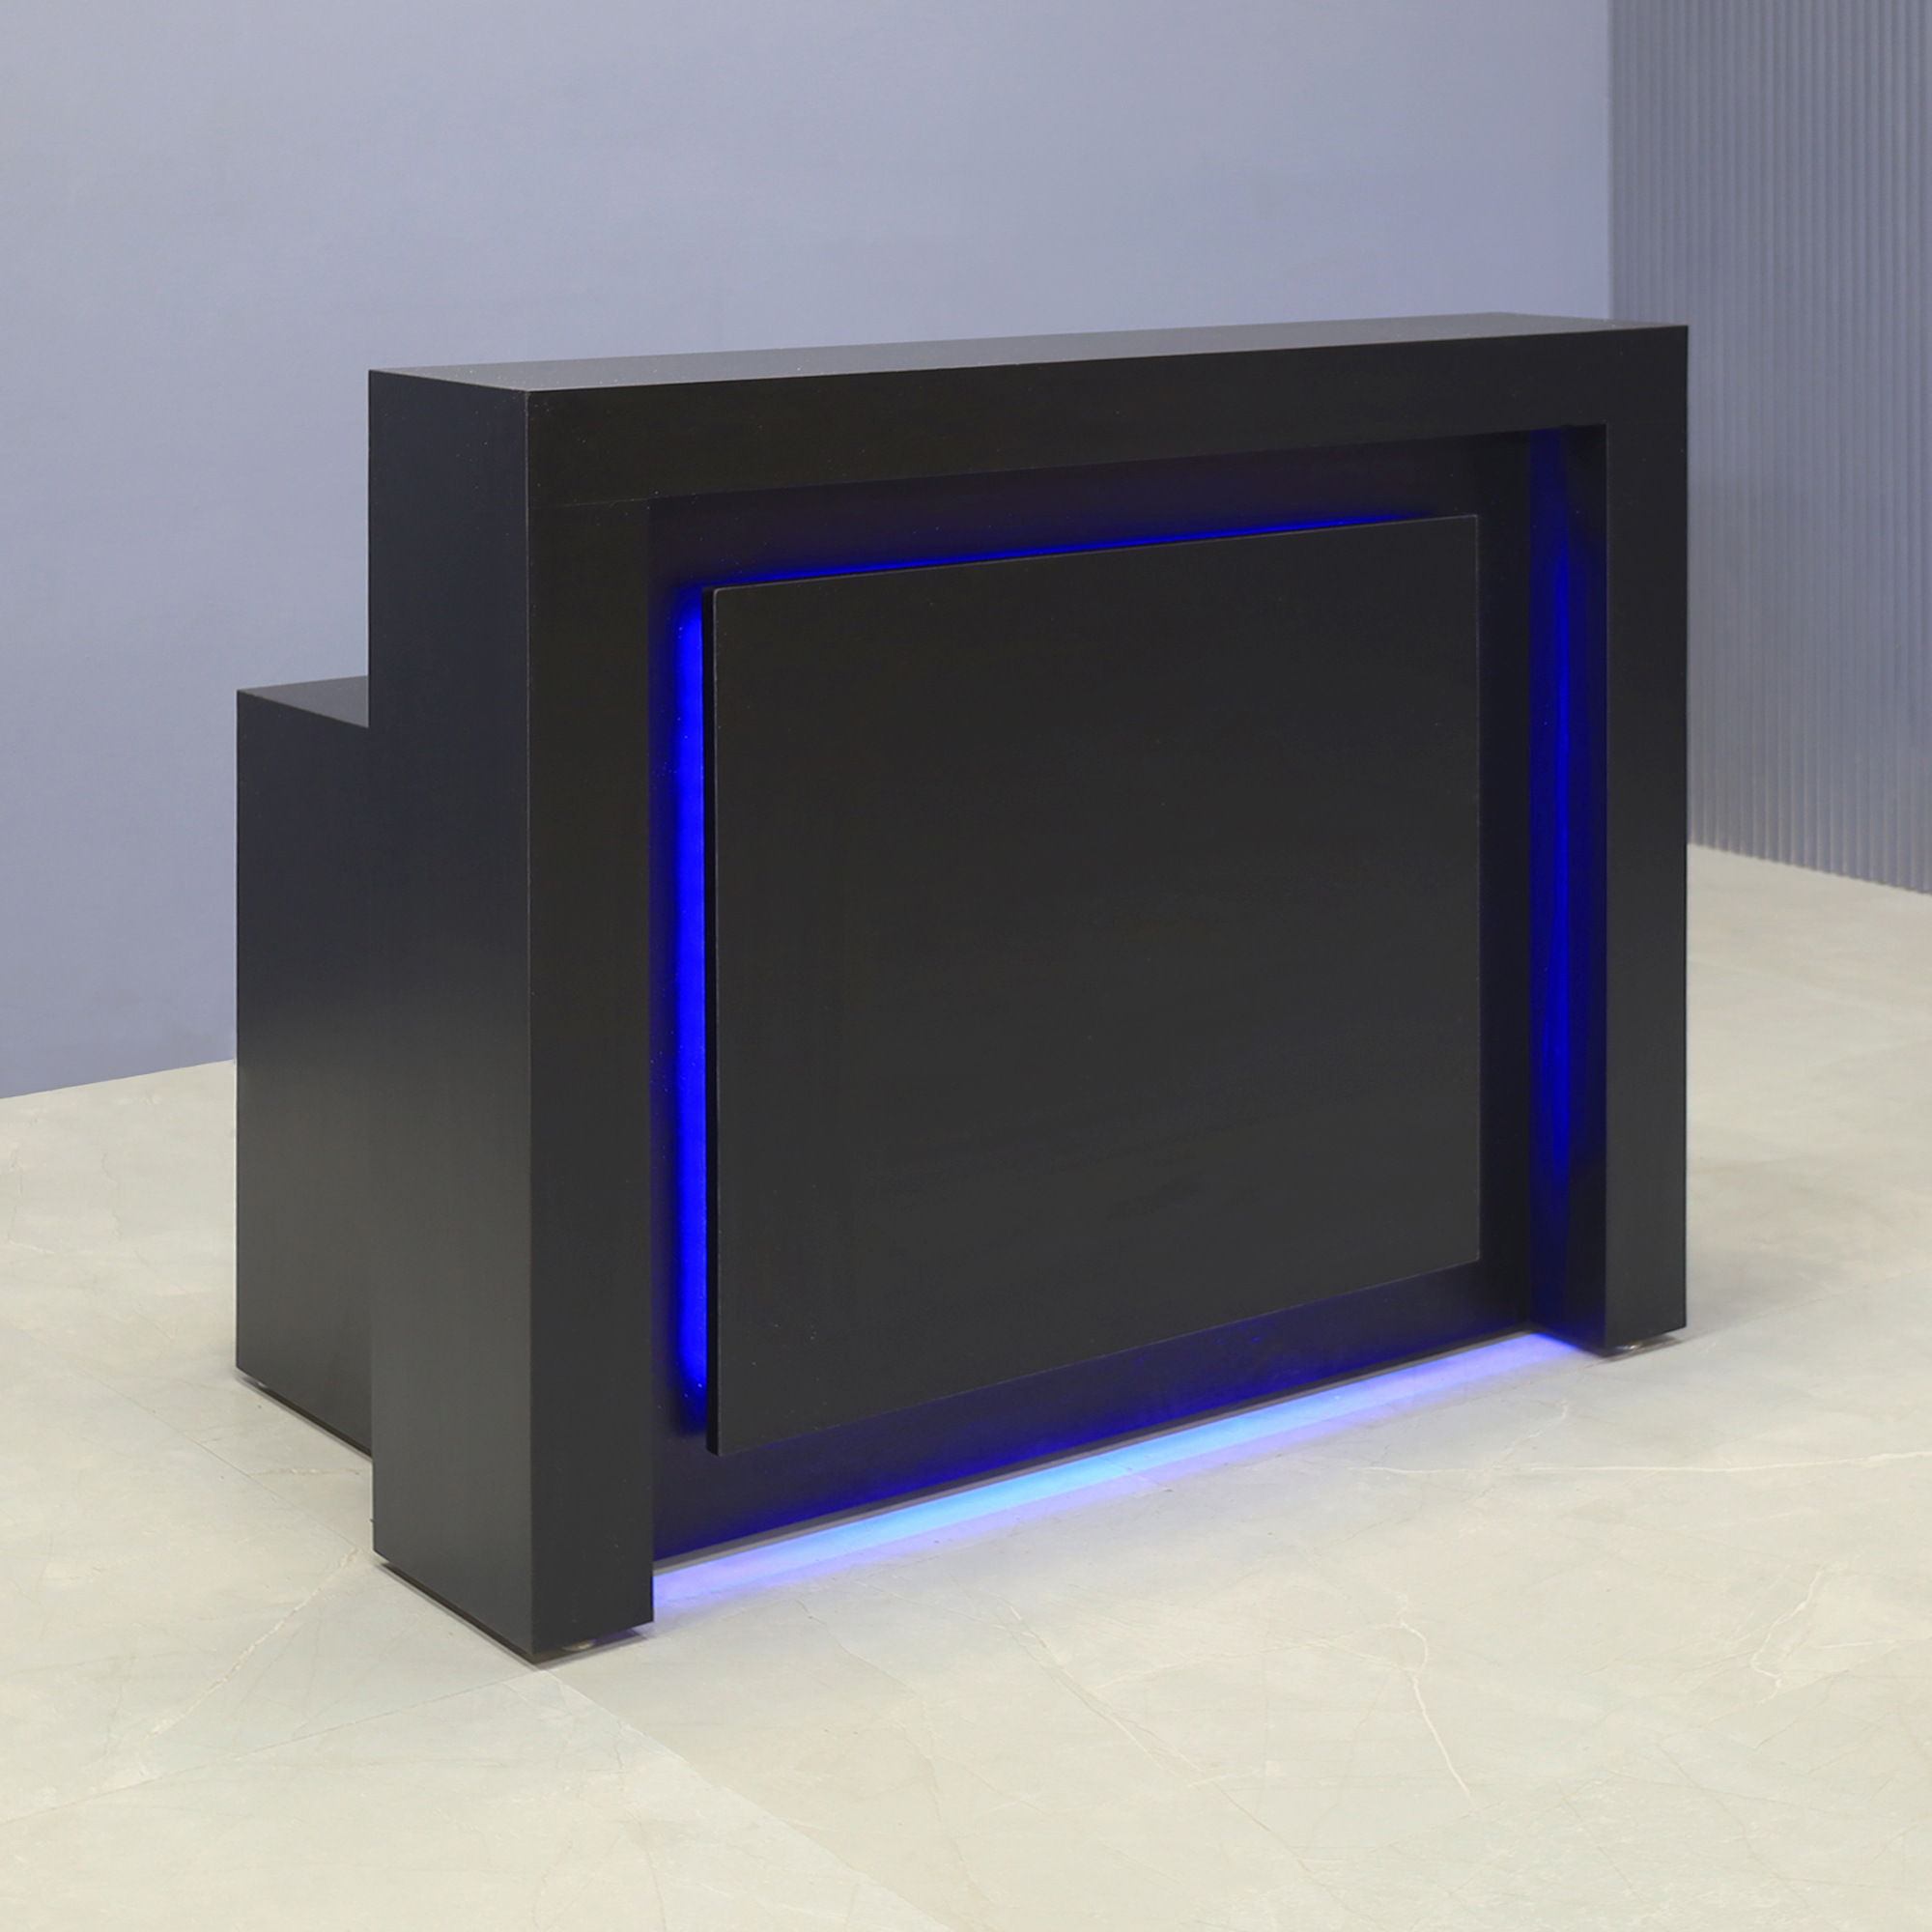 60-inch New York Straight Reception Desk in black matte laminate main desk and accent recess front panel, with colored LED, shown here.